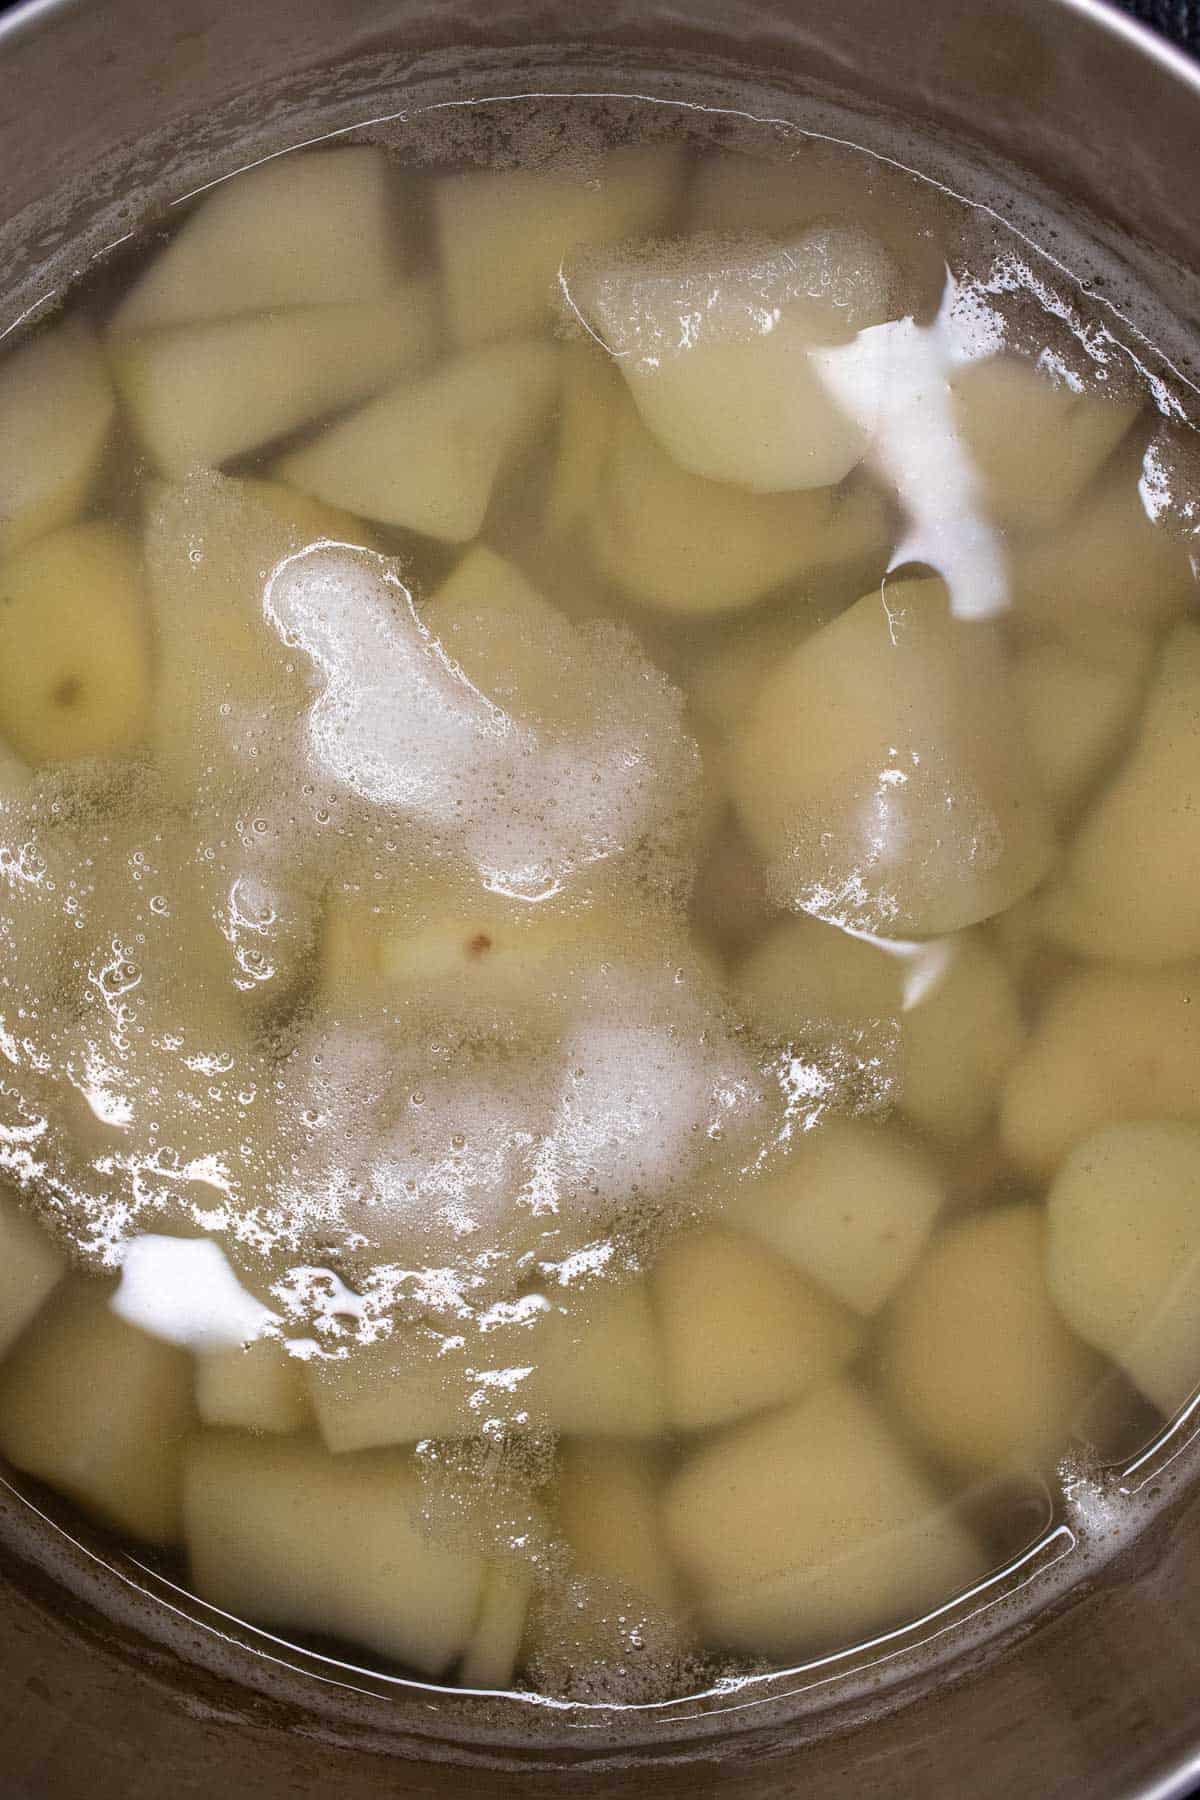 Potatoes par boiling in salted water.